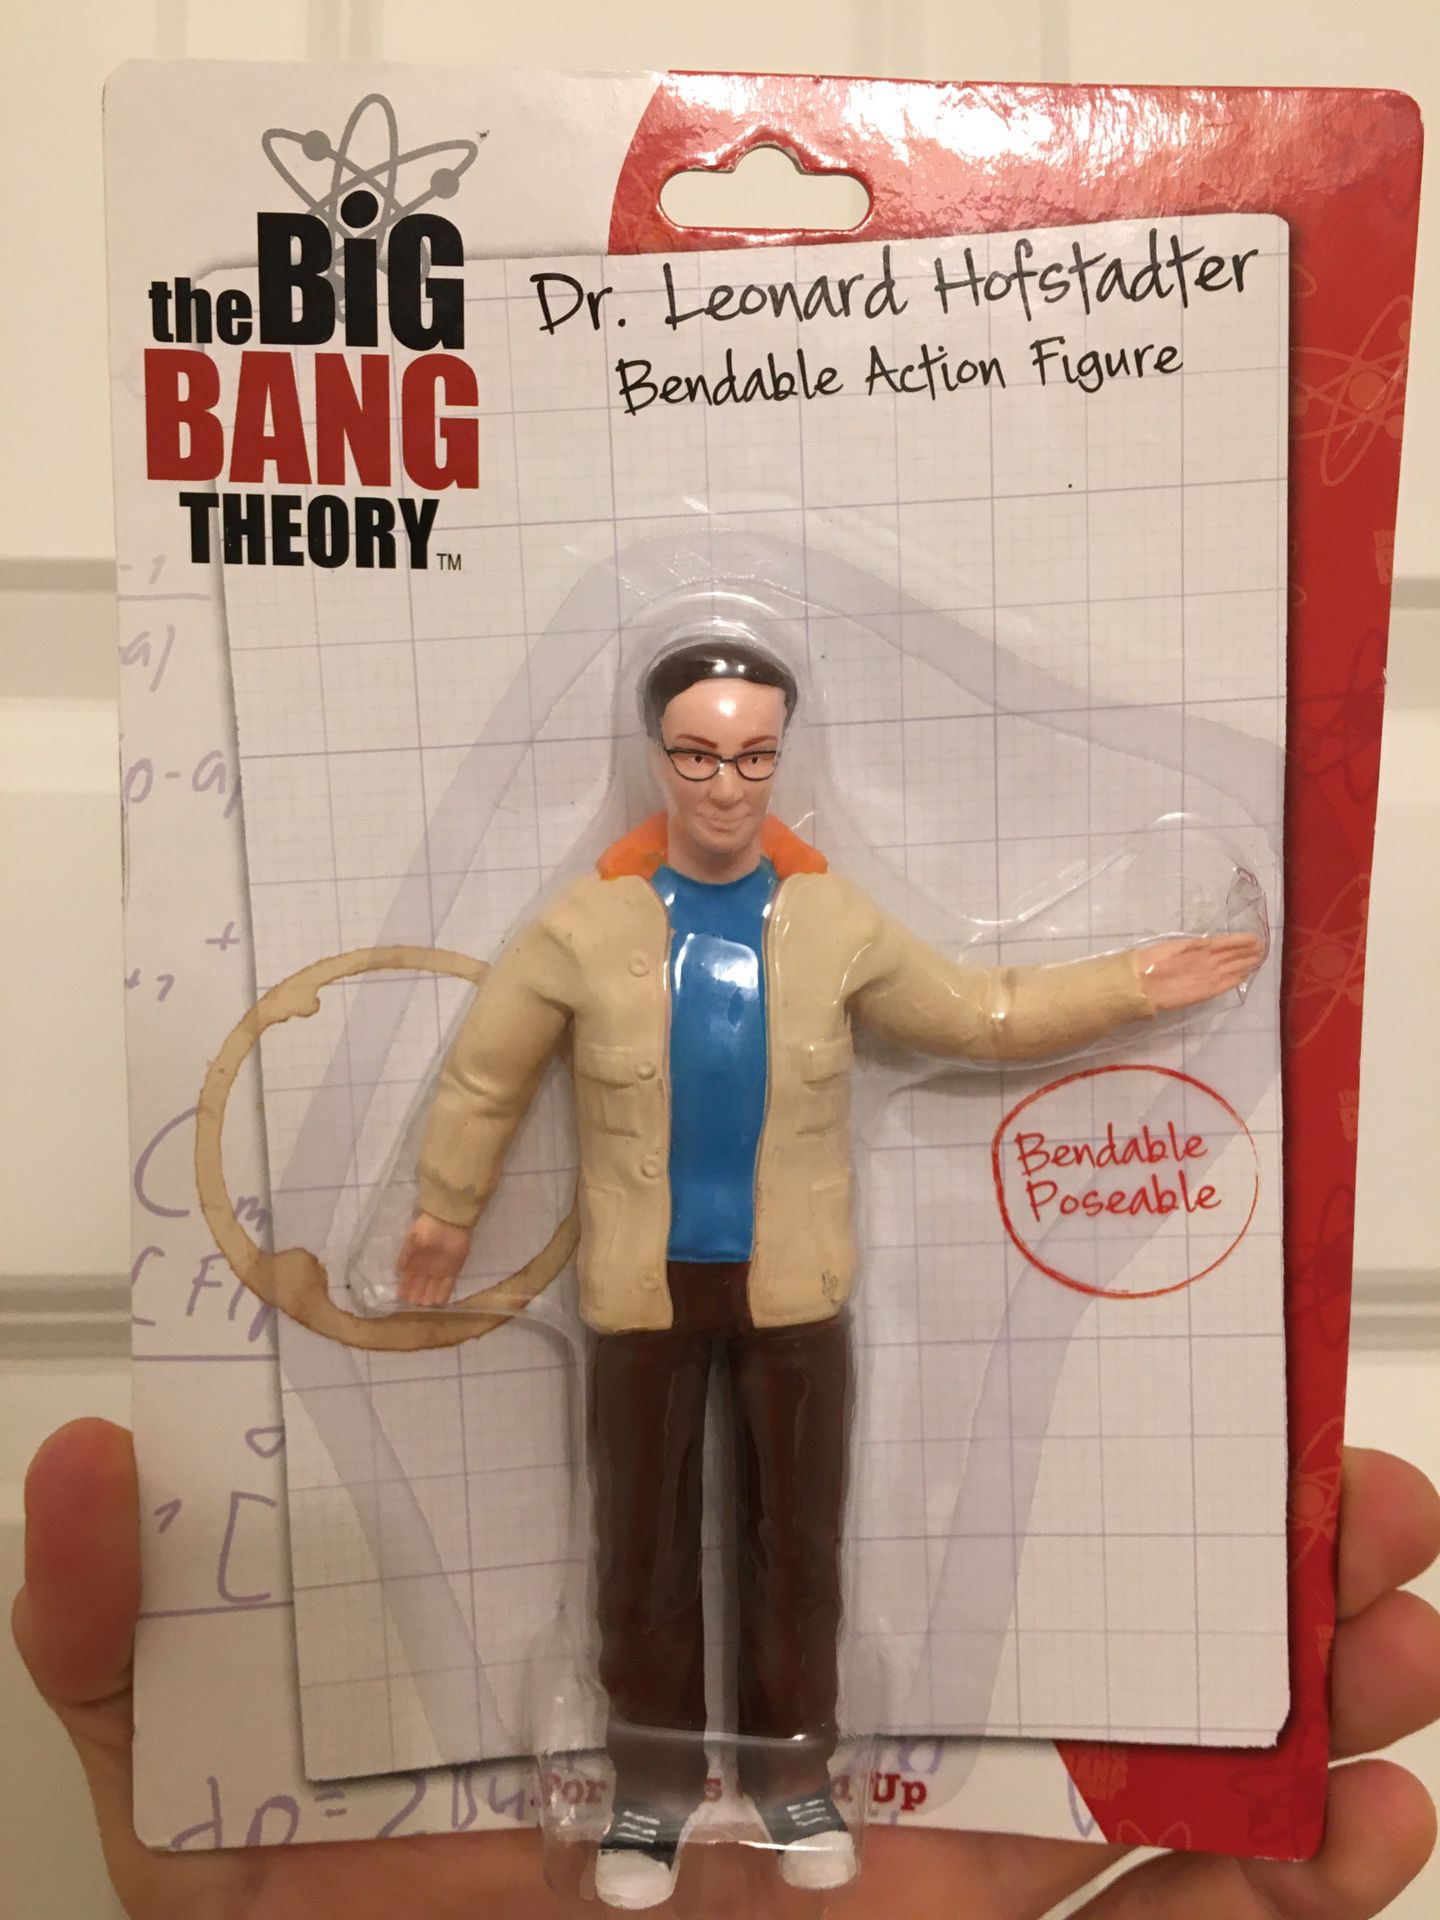 The Big Bang Theory Dr. Leonard Hofstadter 6" Bendable Action Figure. Light box wear otherwise still brand new factory sealed! Shipped with USPS Prio